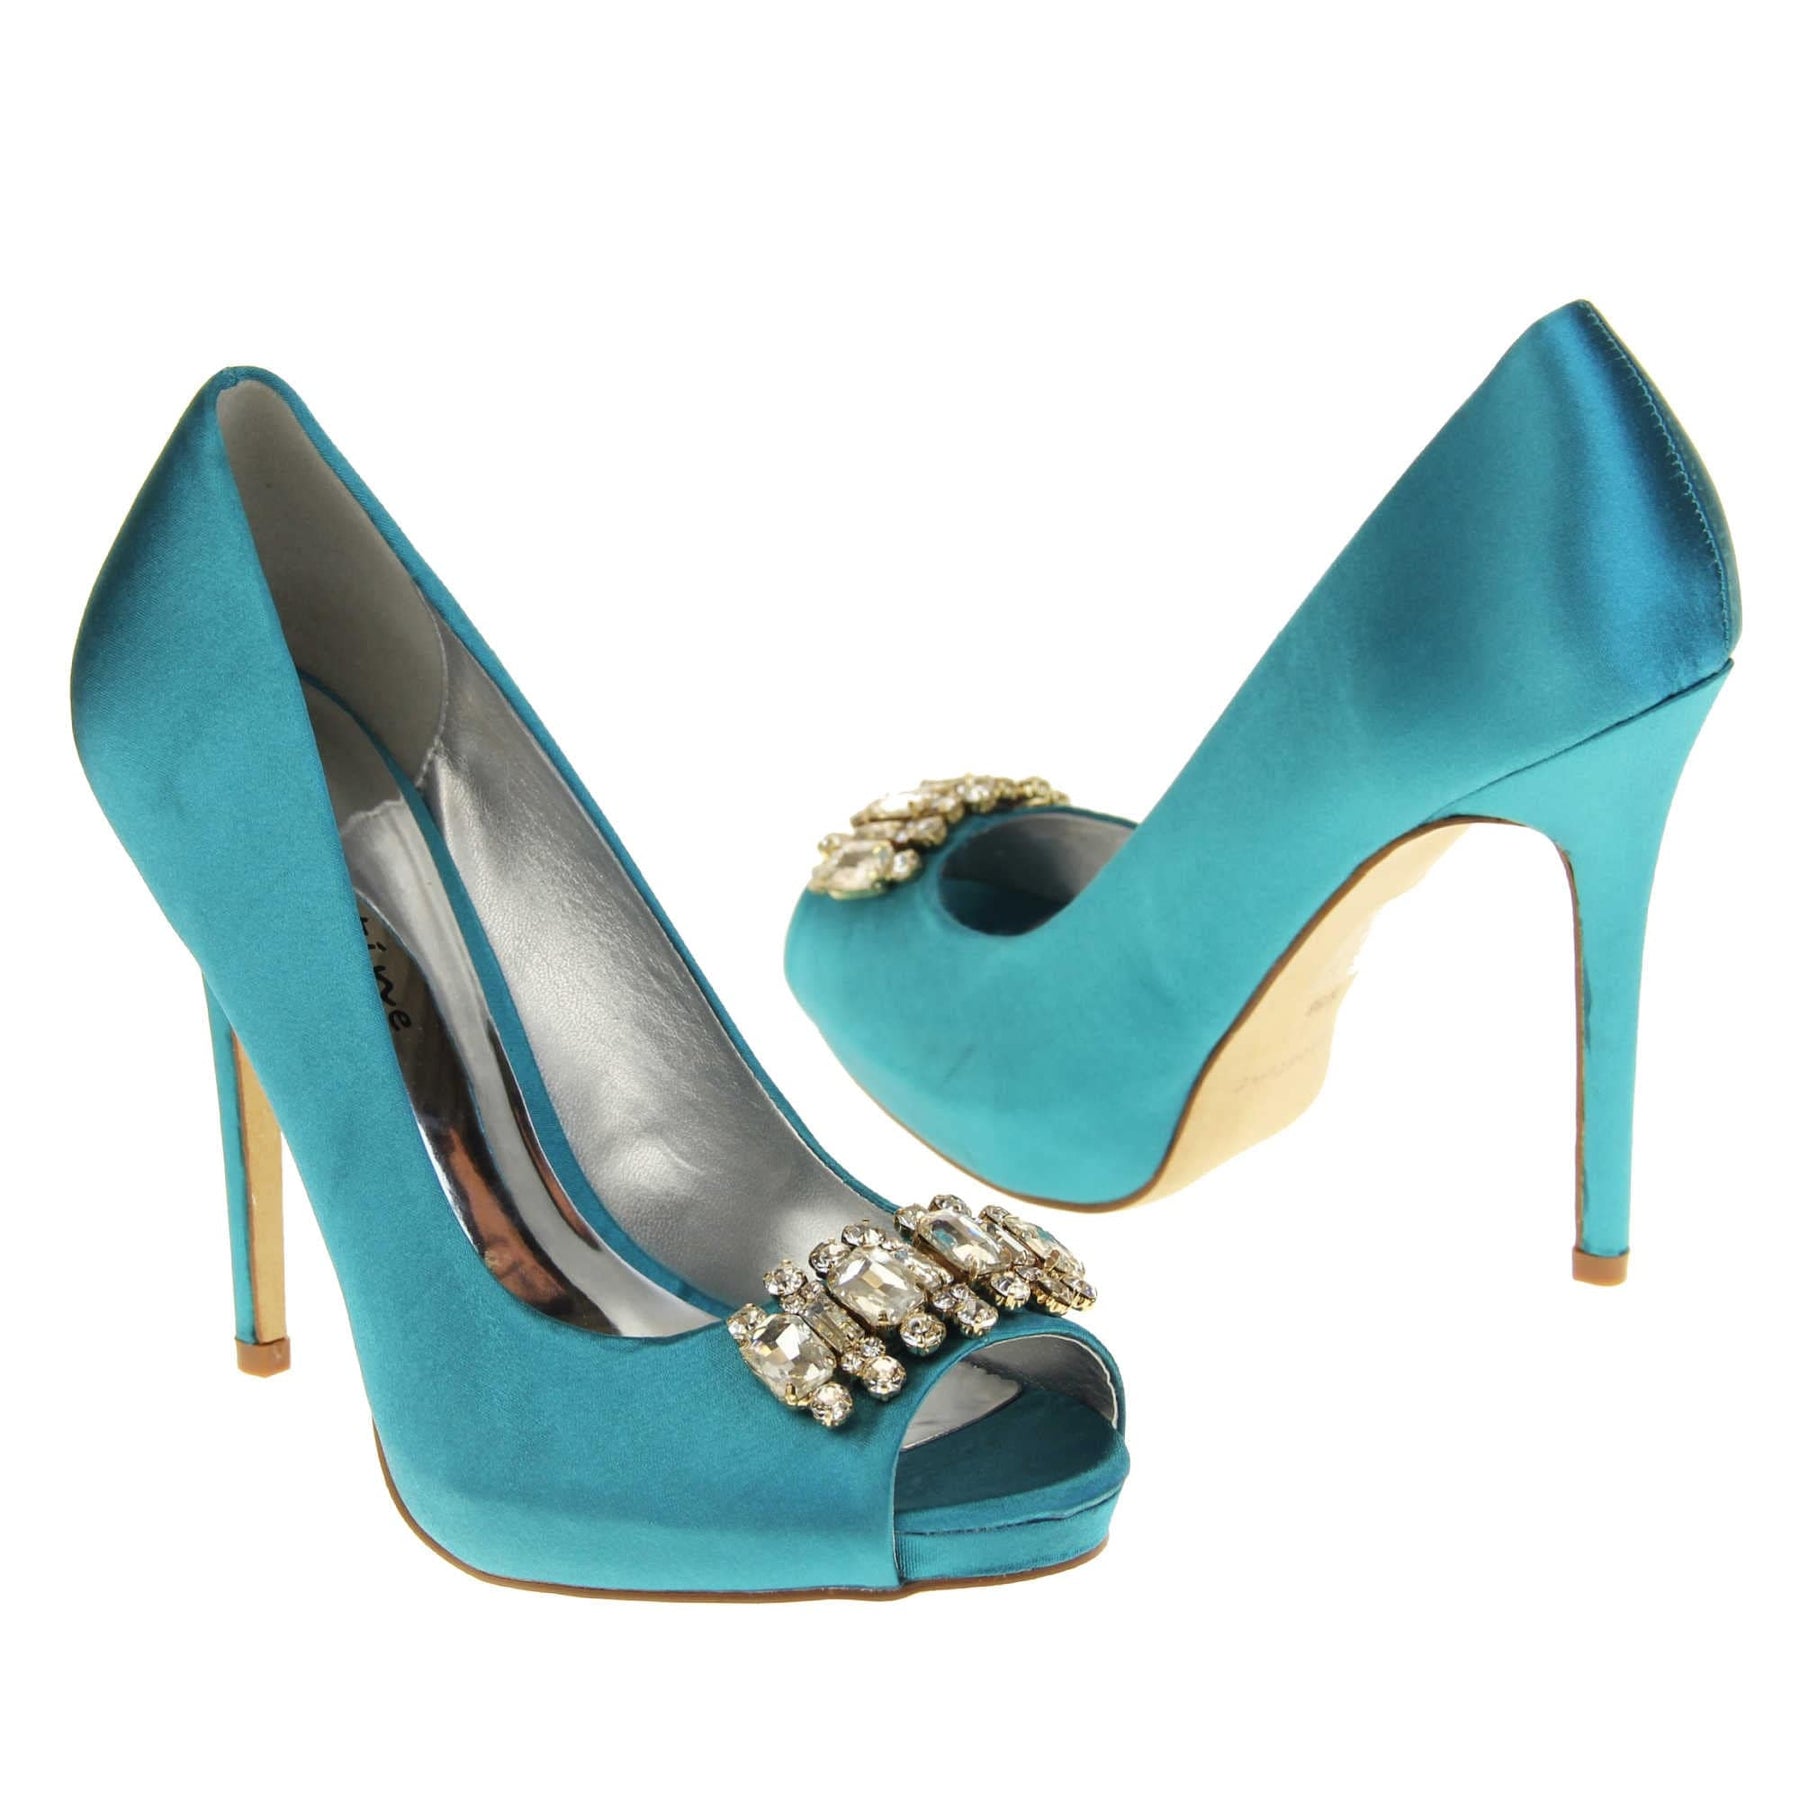 Women Peep Toe Party Dress Shoes And Bag Bride Wedding shoes Teal Blue  Pearl Pumps High heels Ladies Open Toe Blue Green - AliExpress